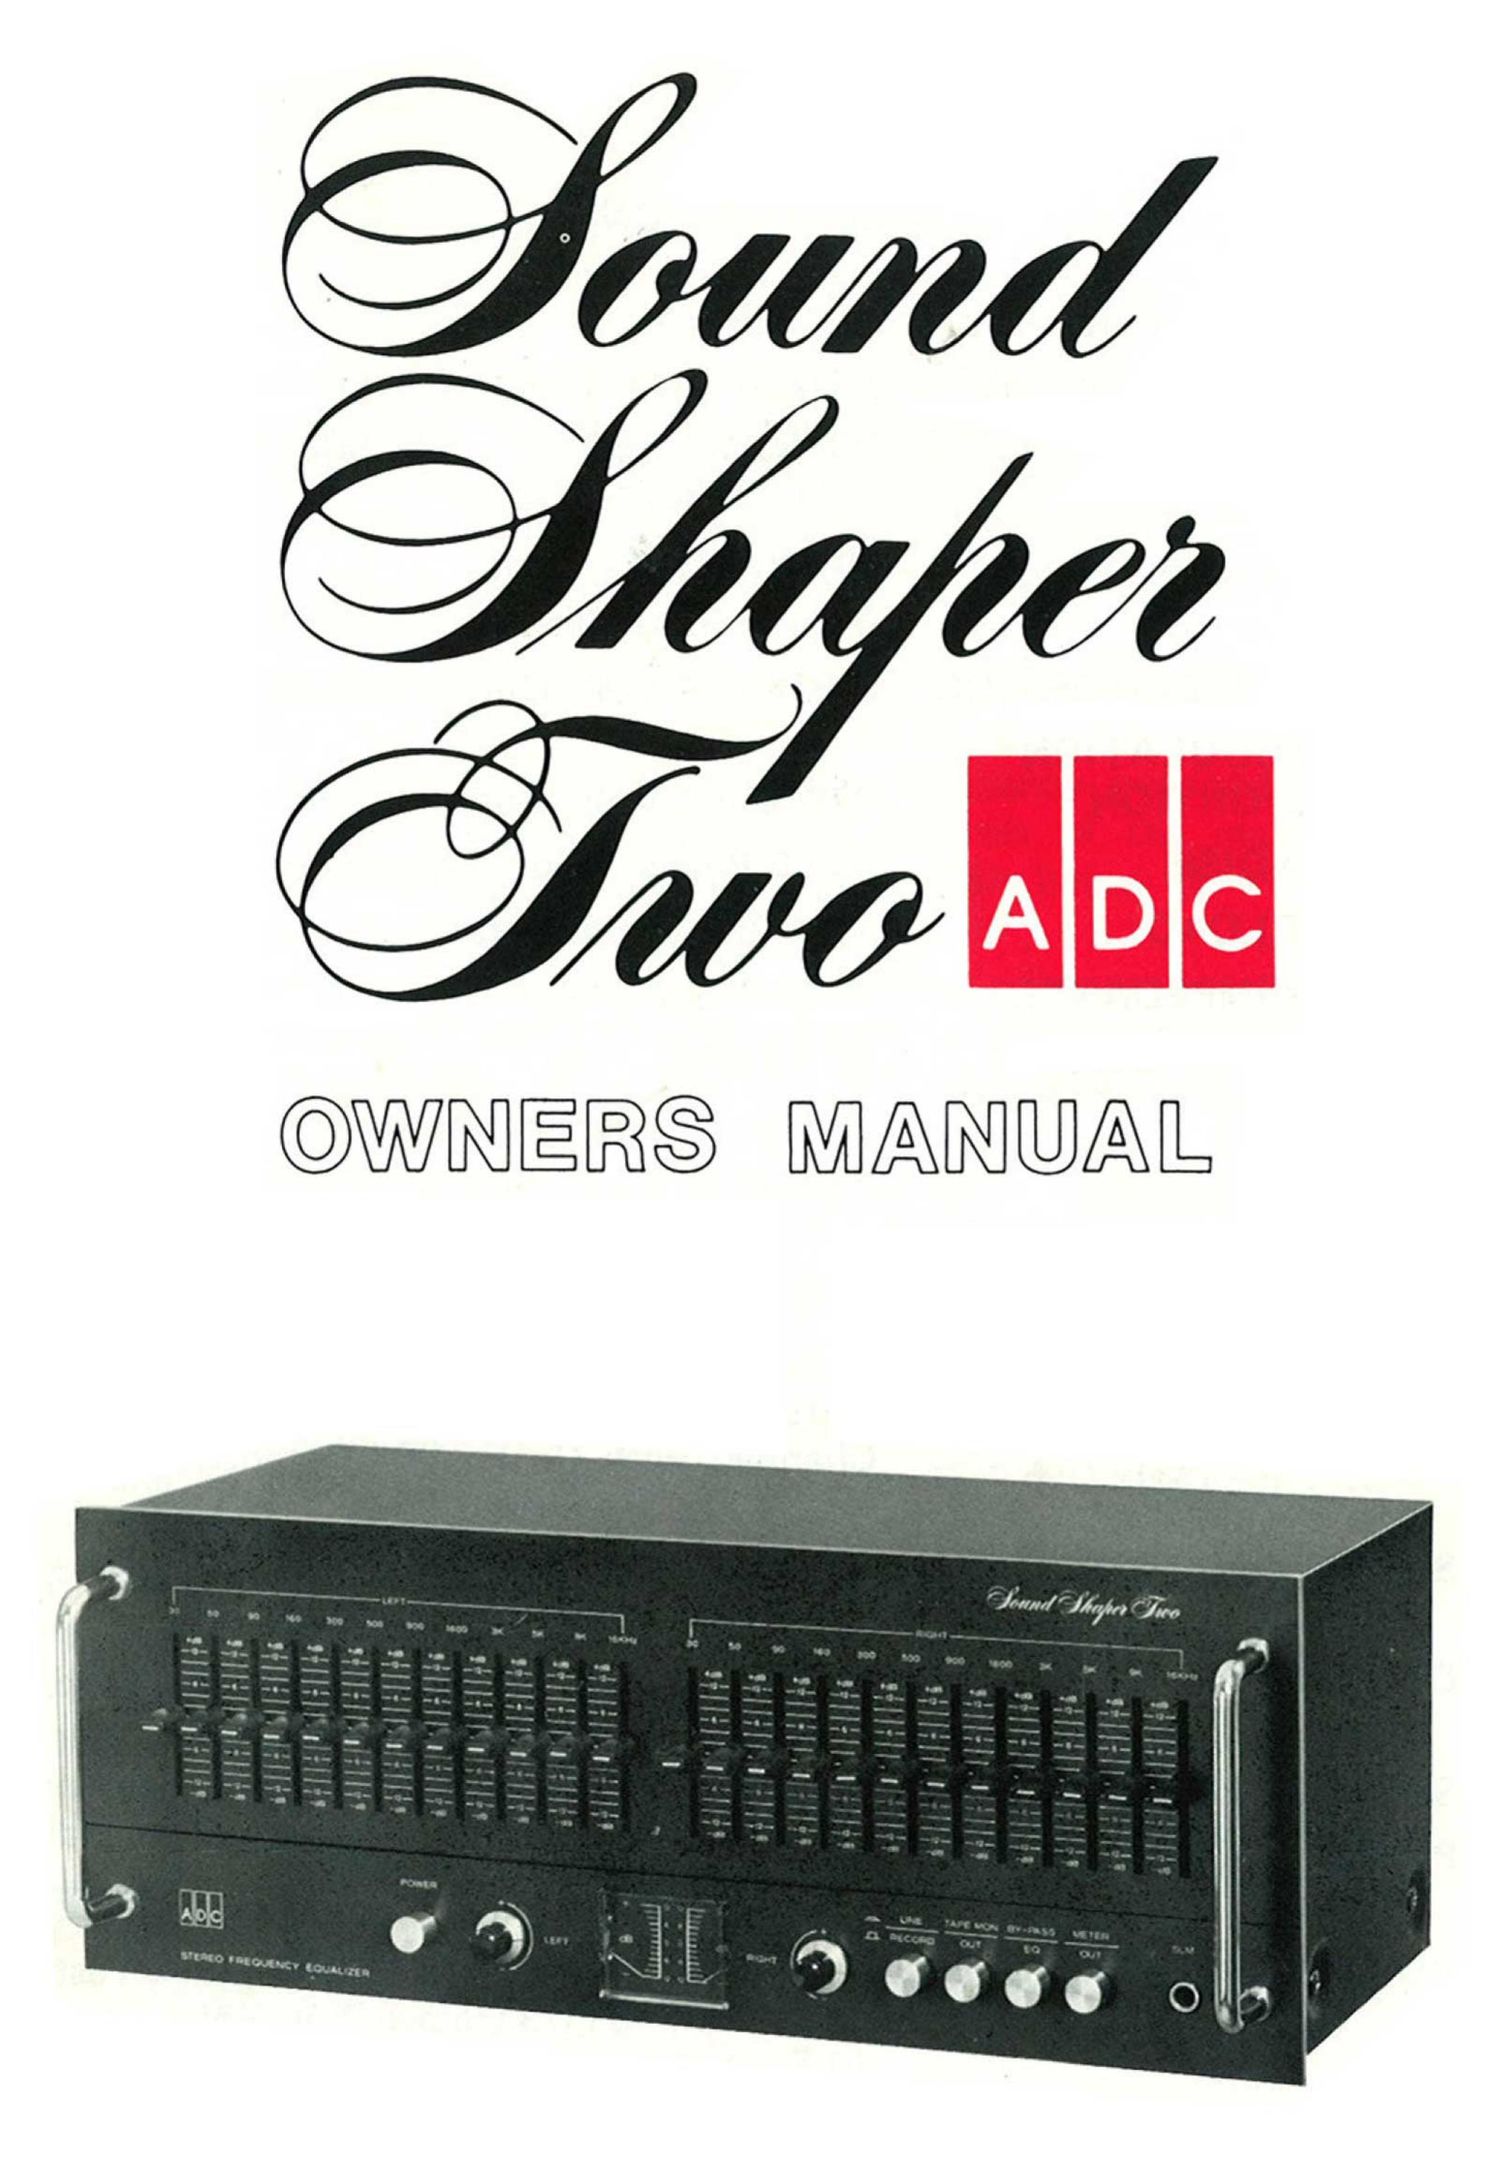 adc soundshaper two owners manual